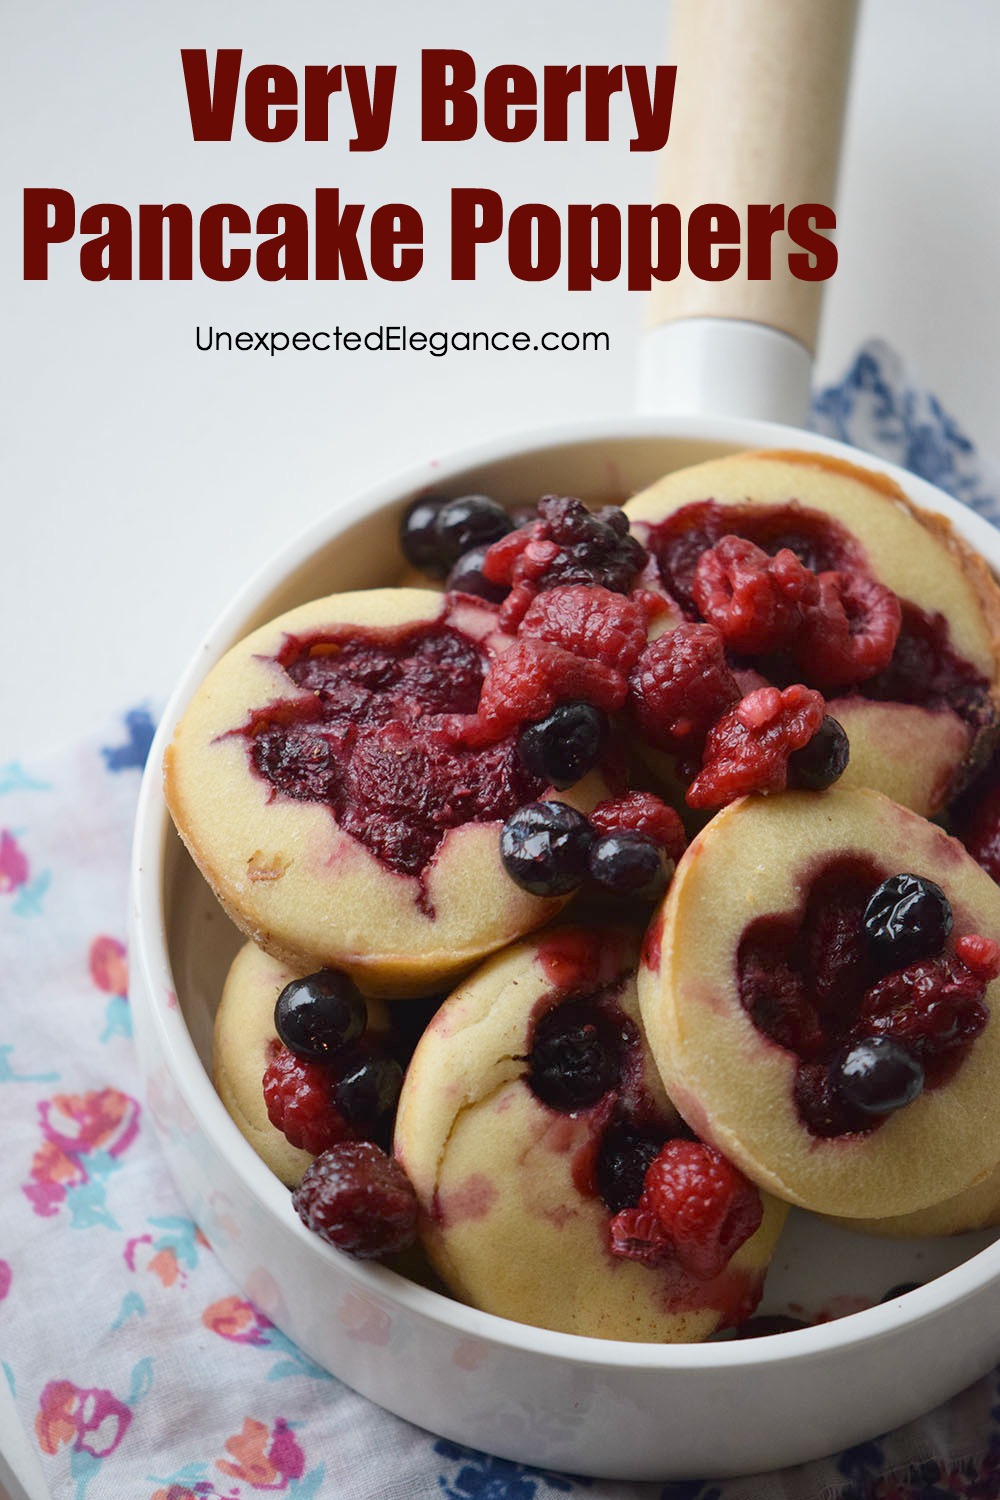 Need a quick and delicious breakfast recipe? Check out these berry pancake poppers! They are great for a brunch or even a breakfast on the go.